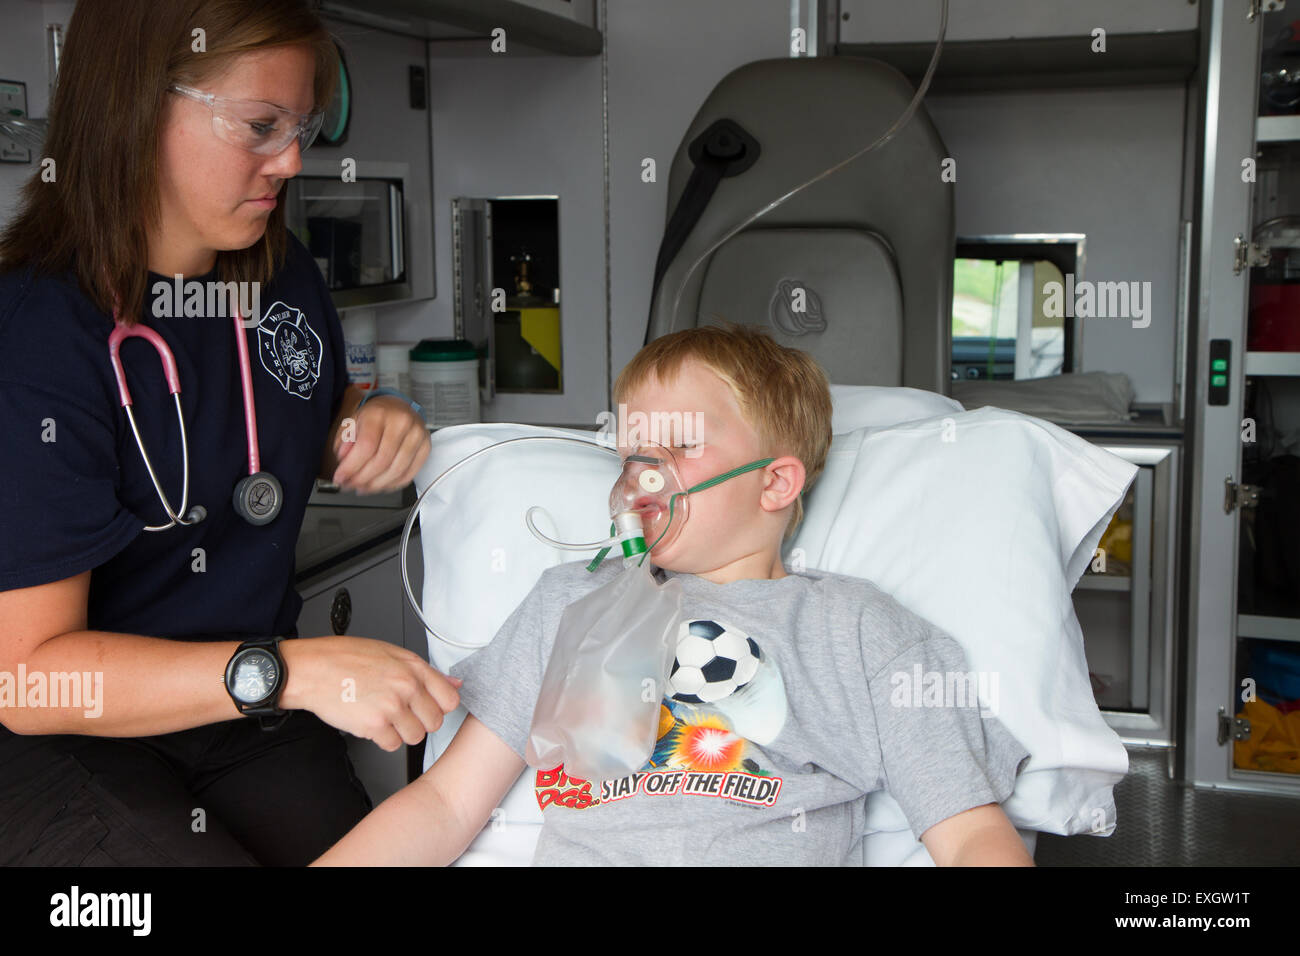 Female paramedic assisting young male patient in back of ambulance. Stock Photo